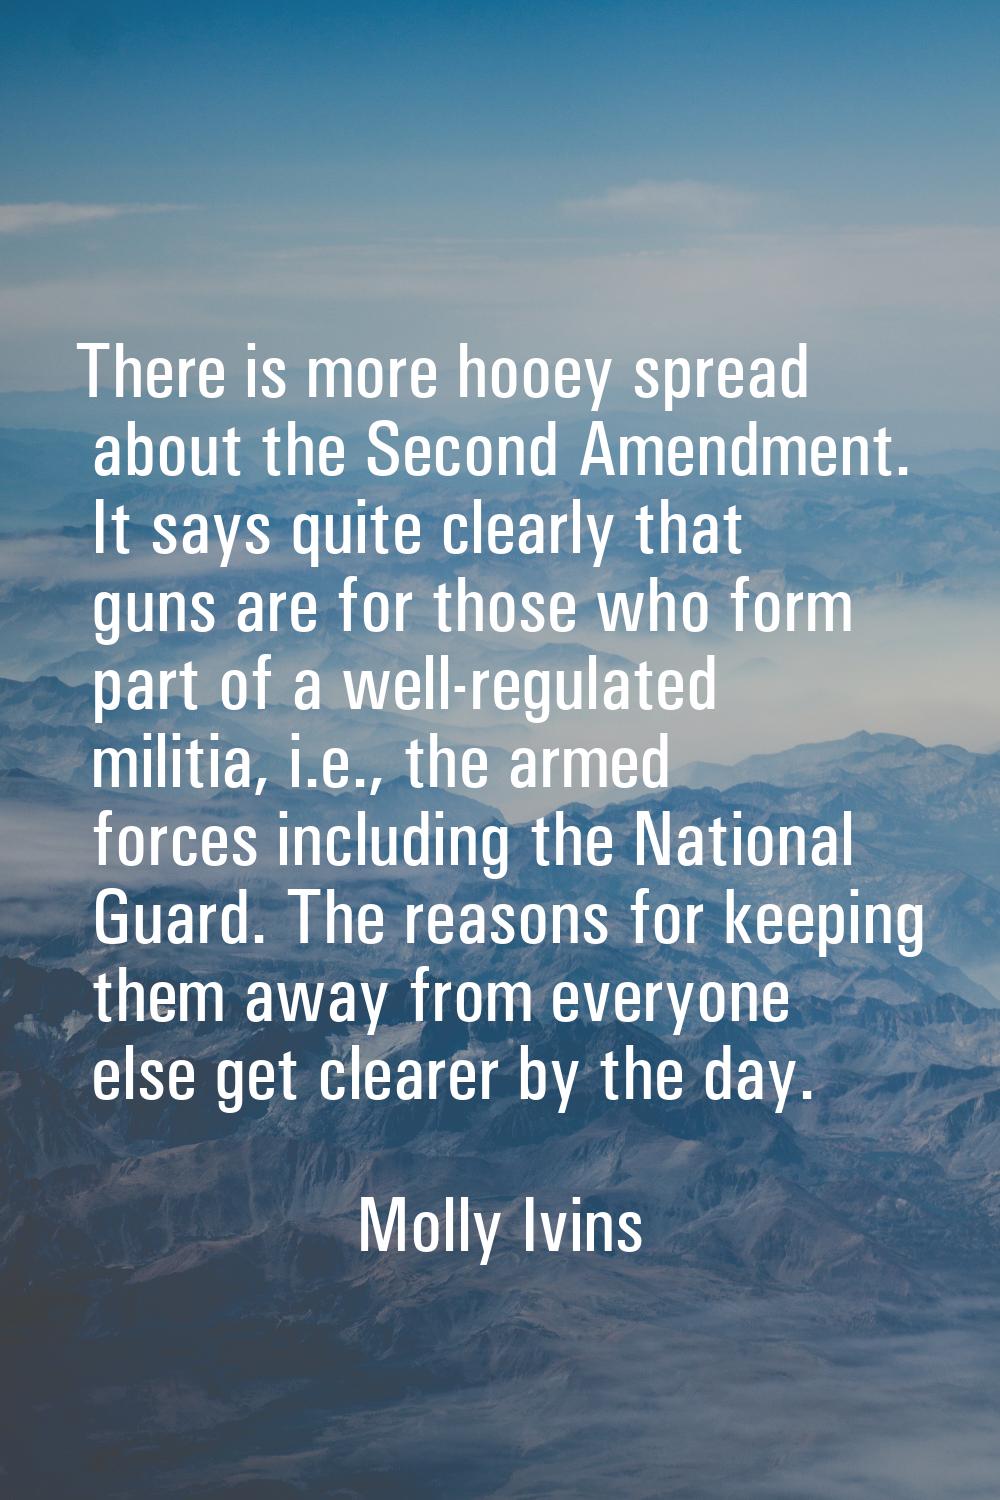 There is more hooey spread about the Second Amendment. It says quite clearly that guns are for thos